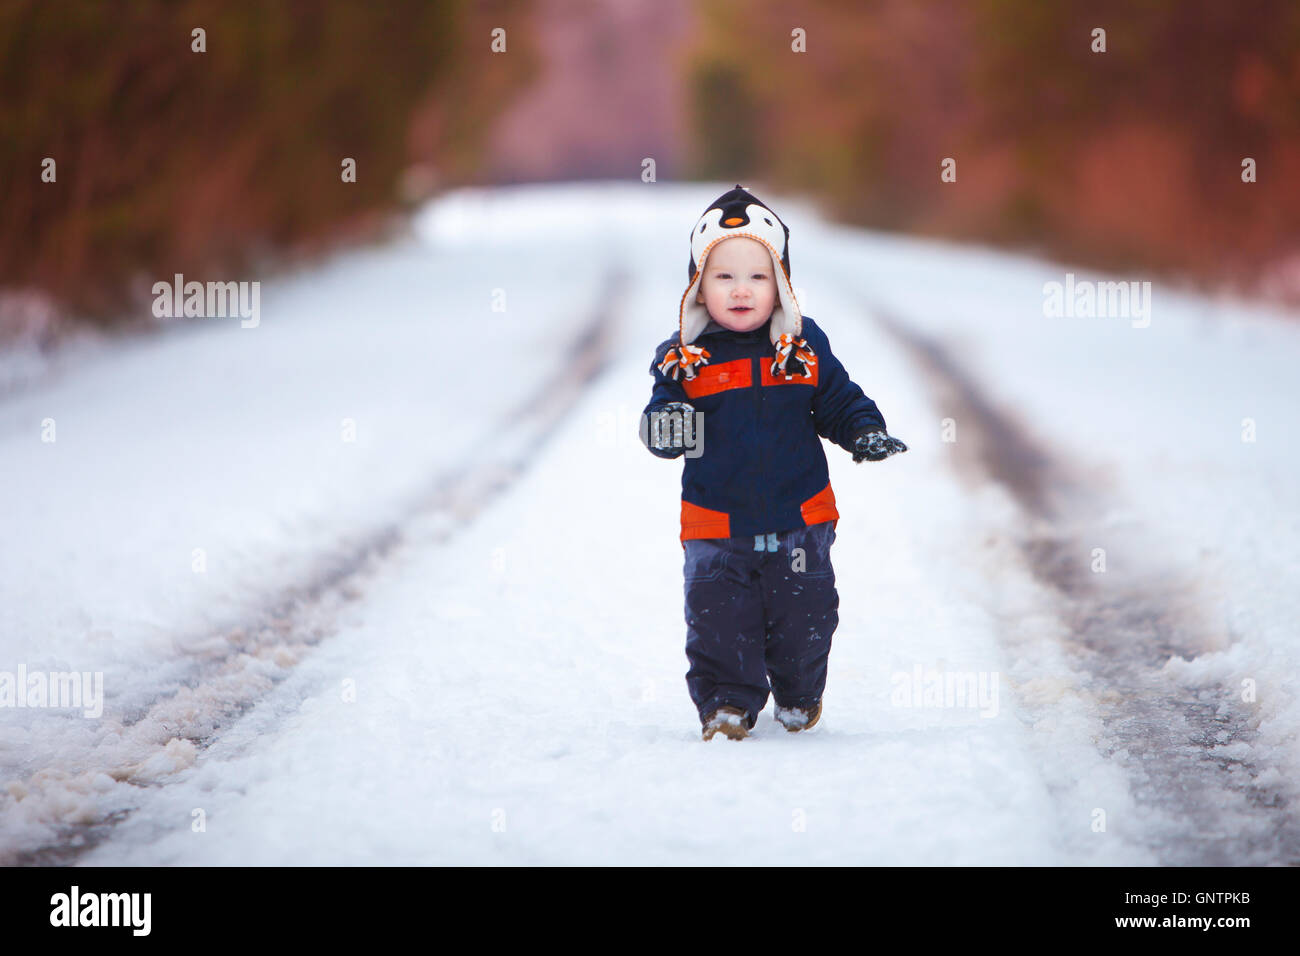 A young boy wearing a winter coat and had smiles as he walks down a snow covered road. Stock Photo